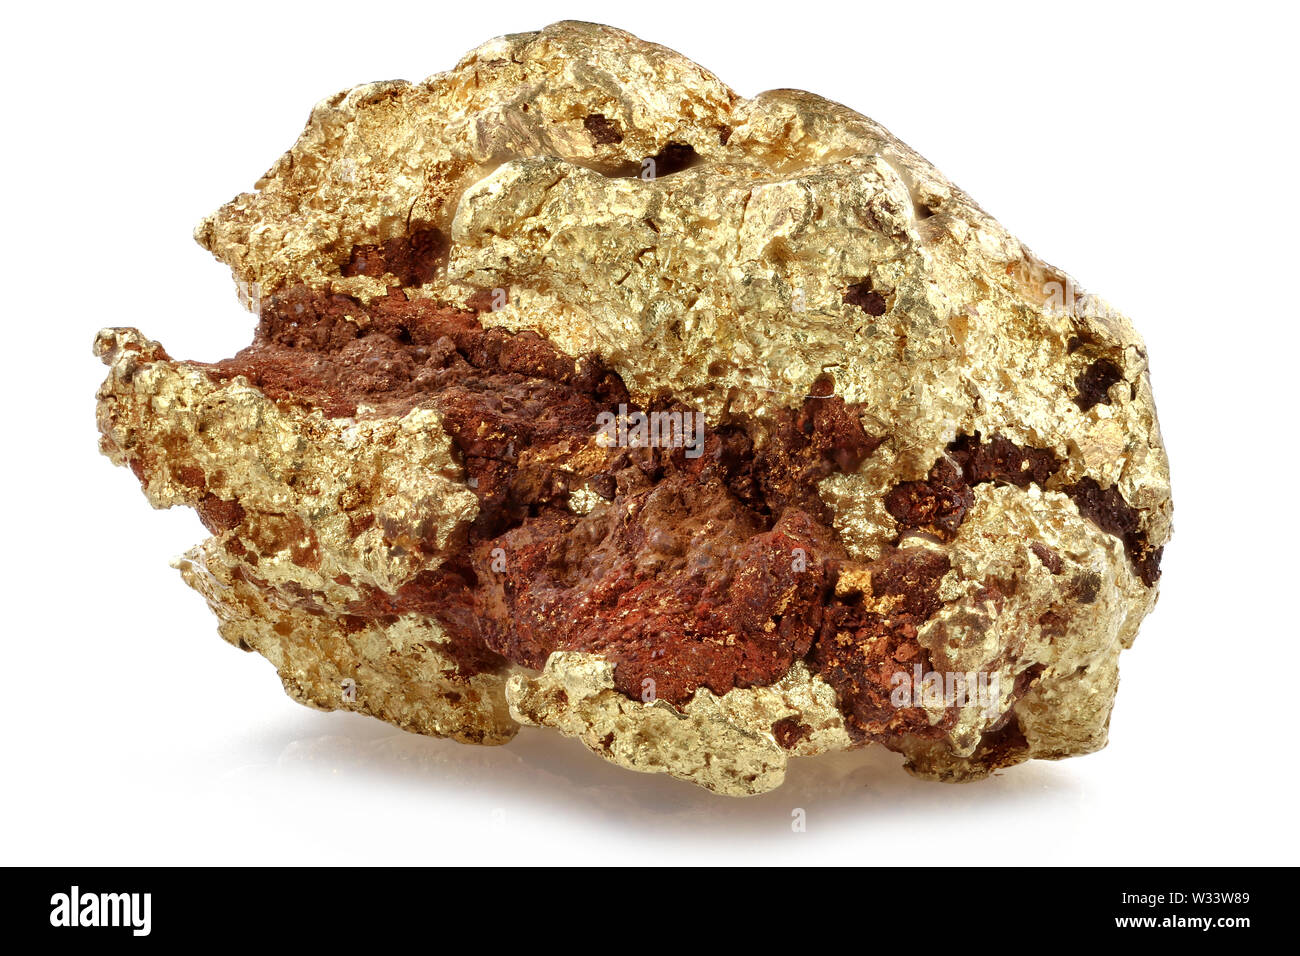 native 1.05 gram gold nugget from Kenieba District, Mali, Africa isolated on white background Stock Photo